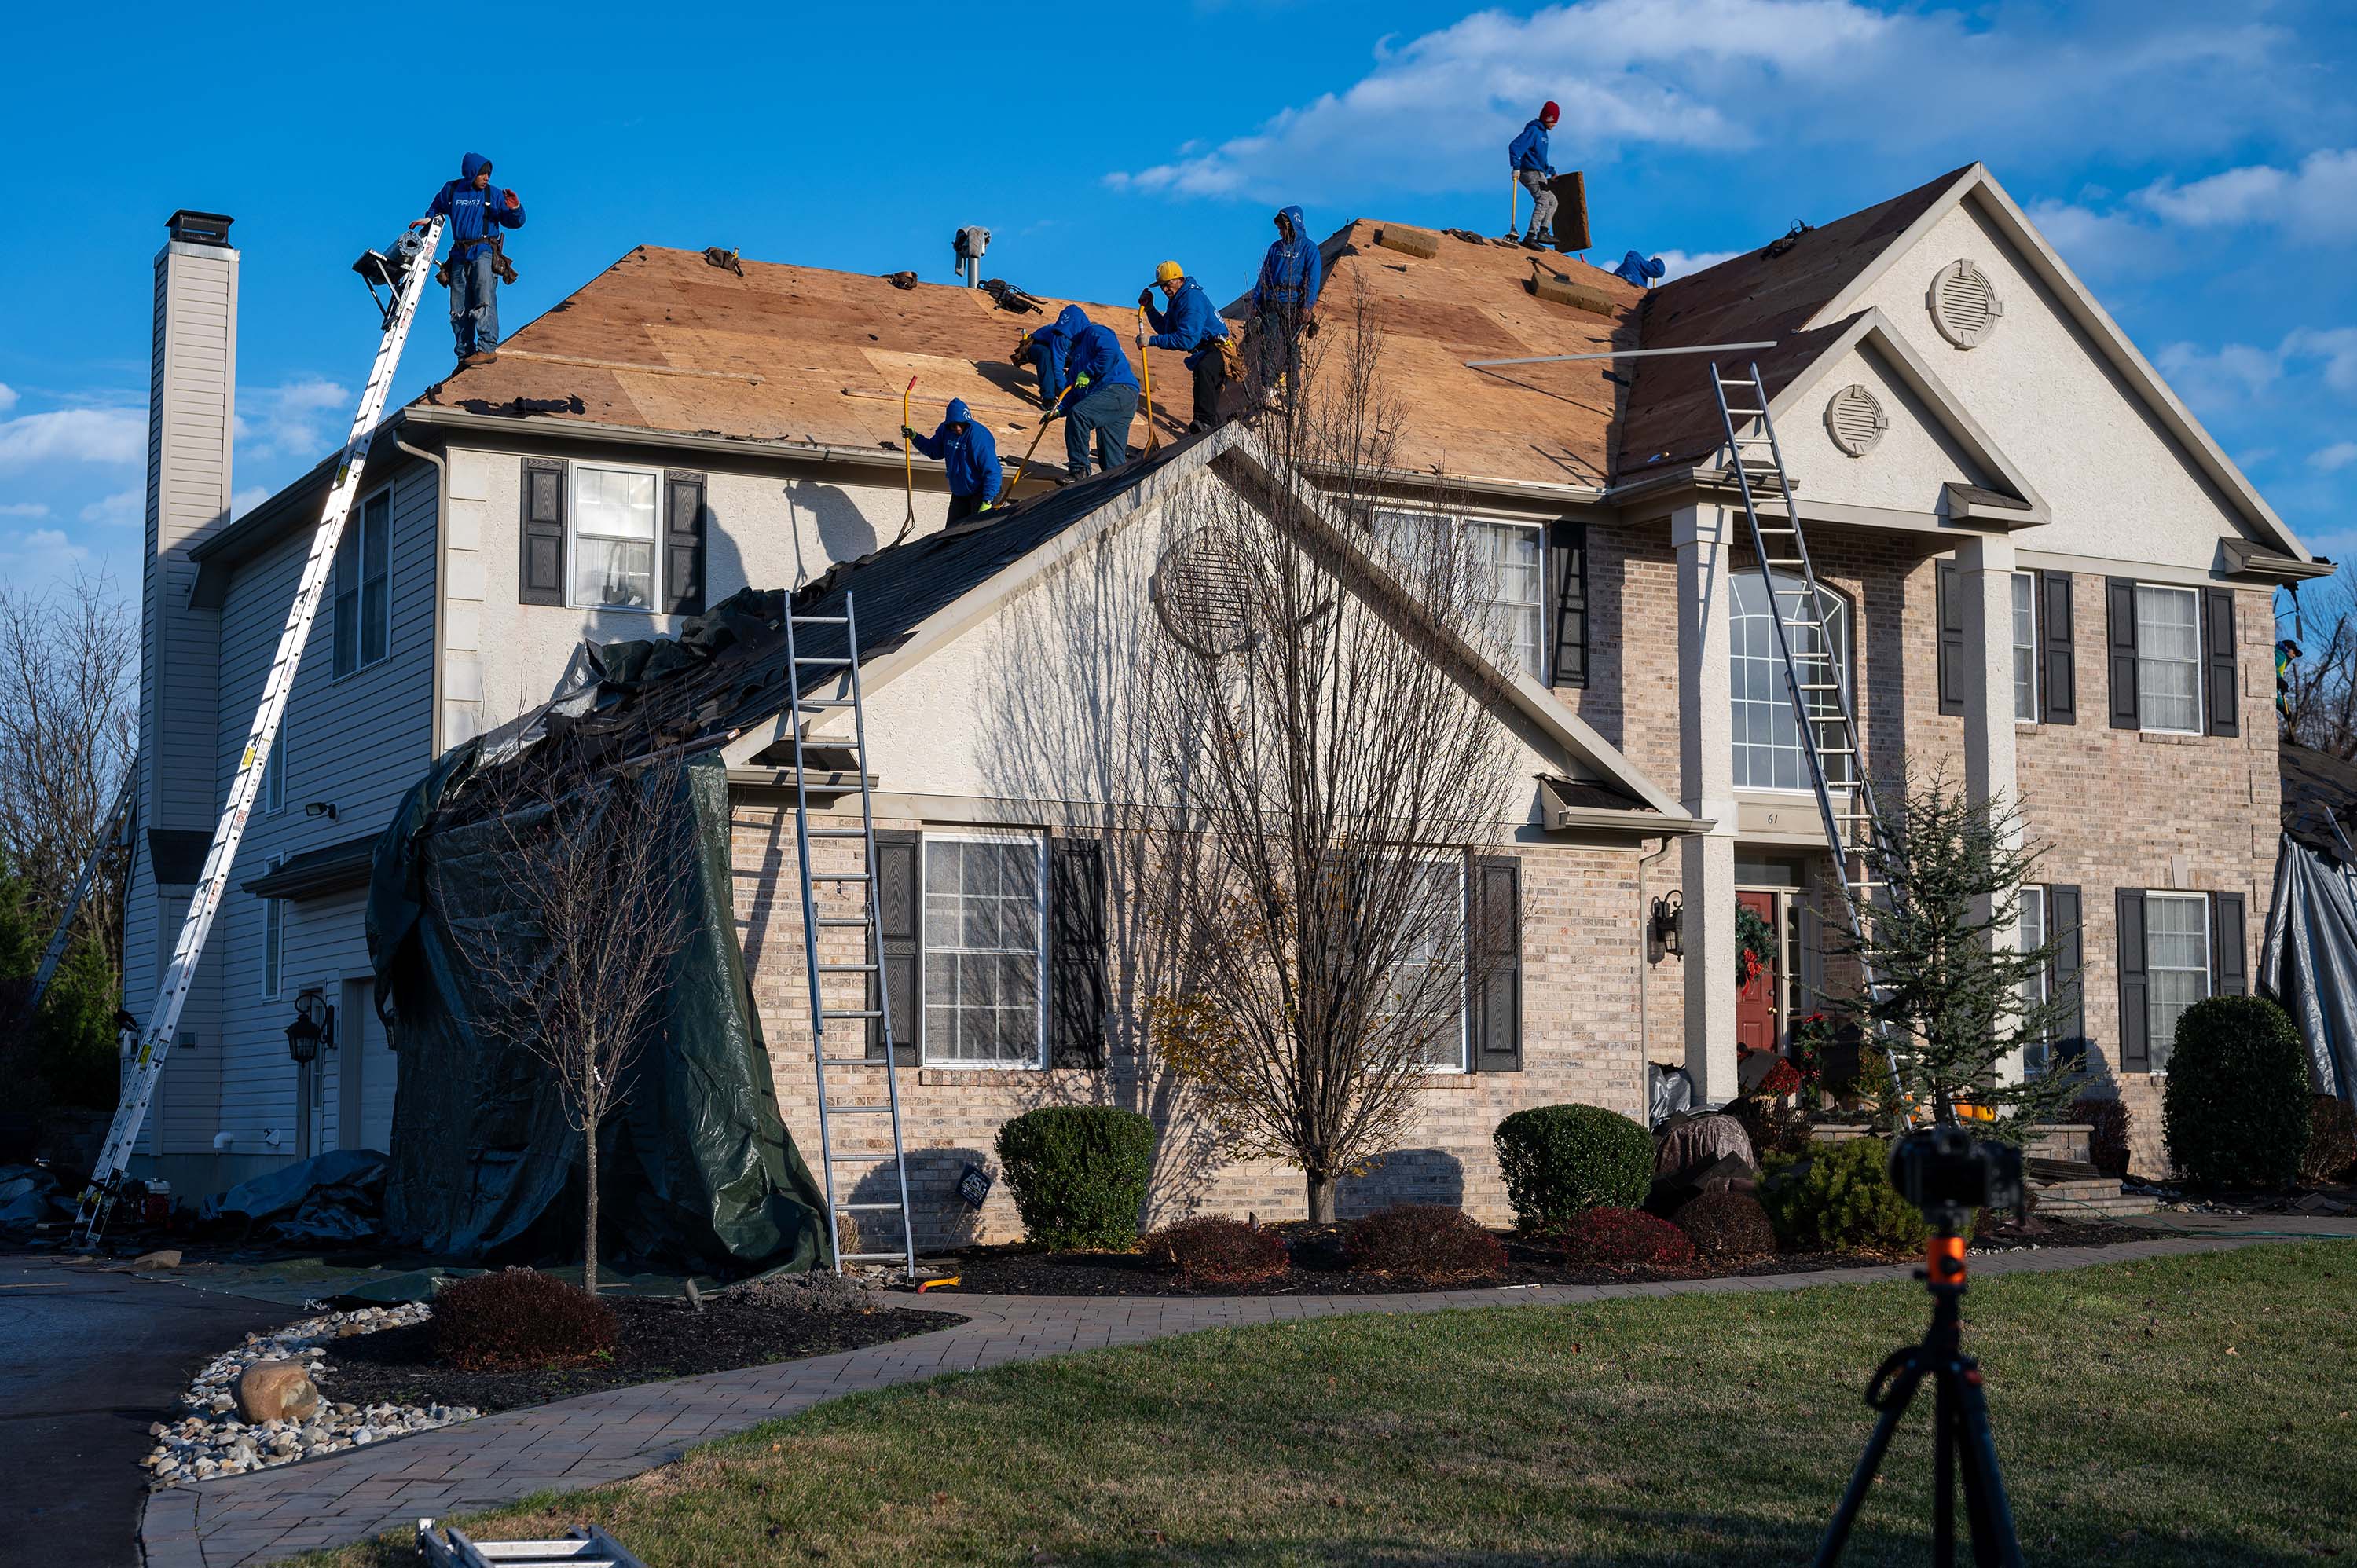 Bensalem Roofing repair company - residential roofing contractors in Bensalem, PA (large image)